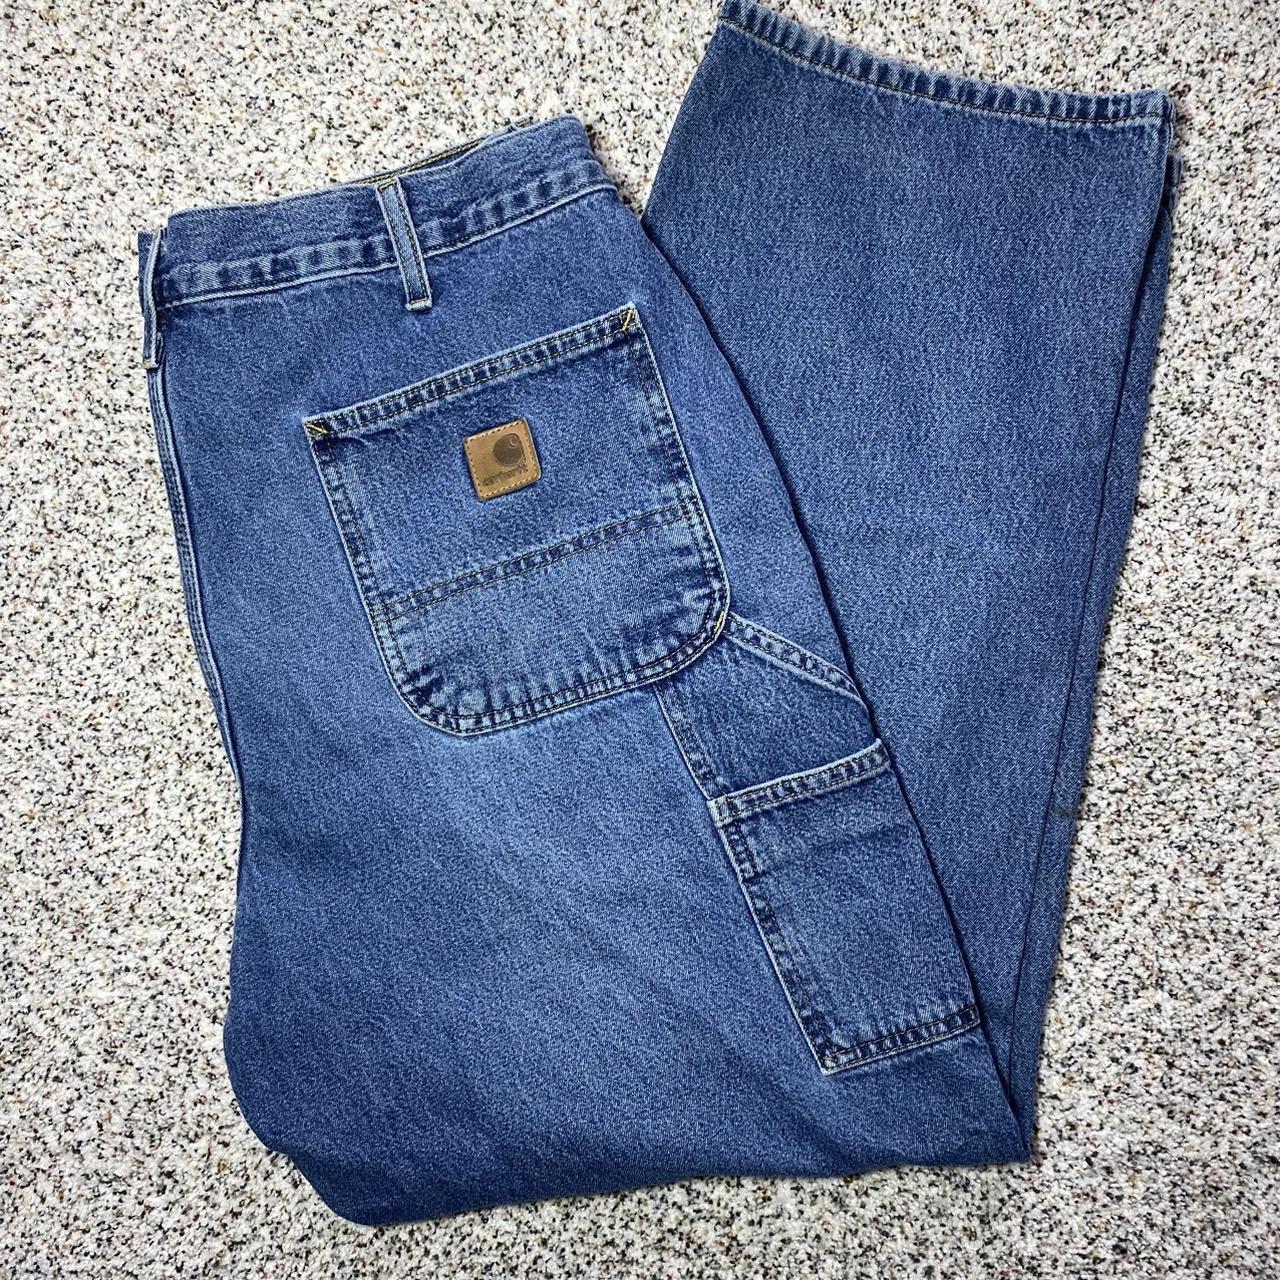 Crazy Vintage Carhartt Carpenter Pants with Awesome... - Depop